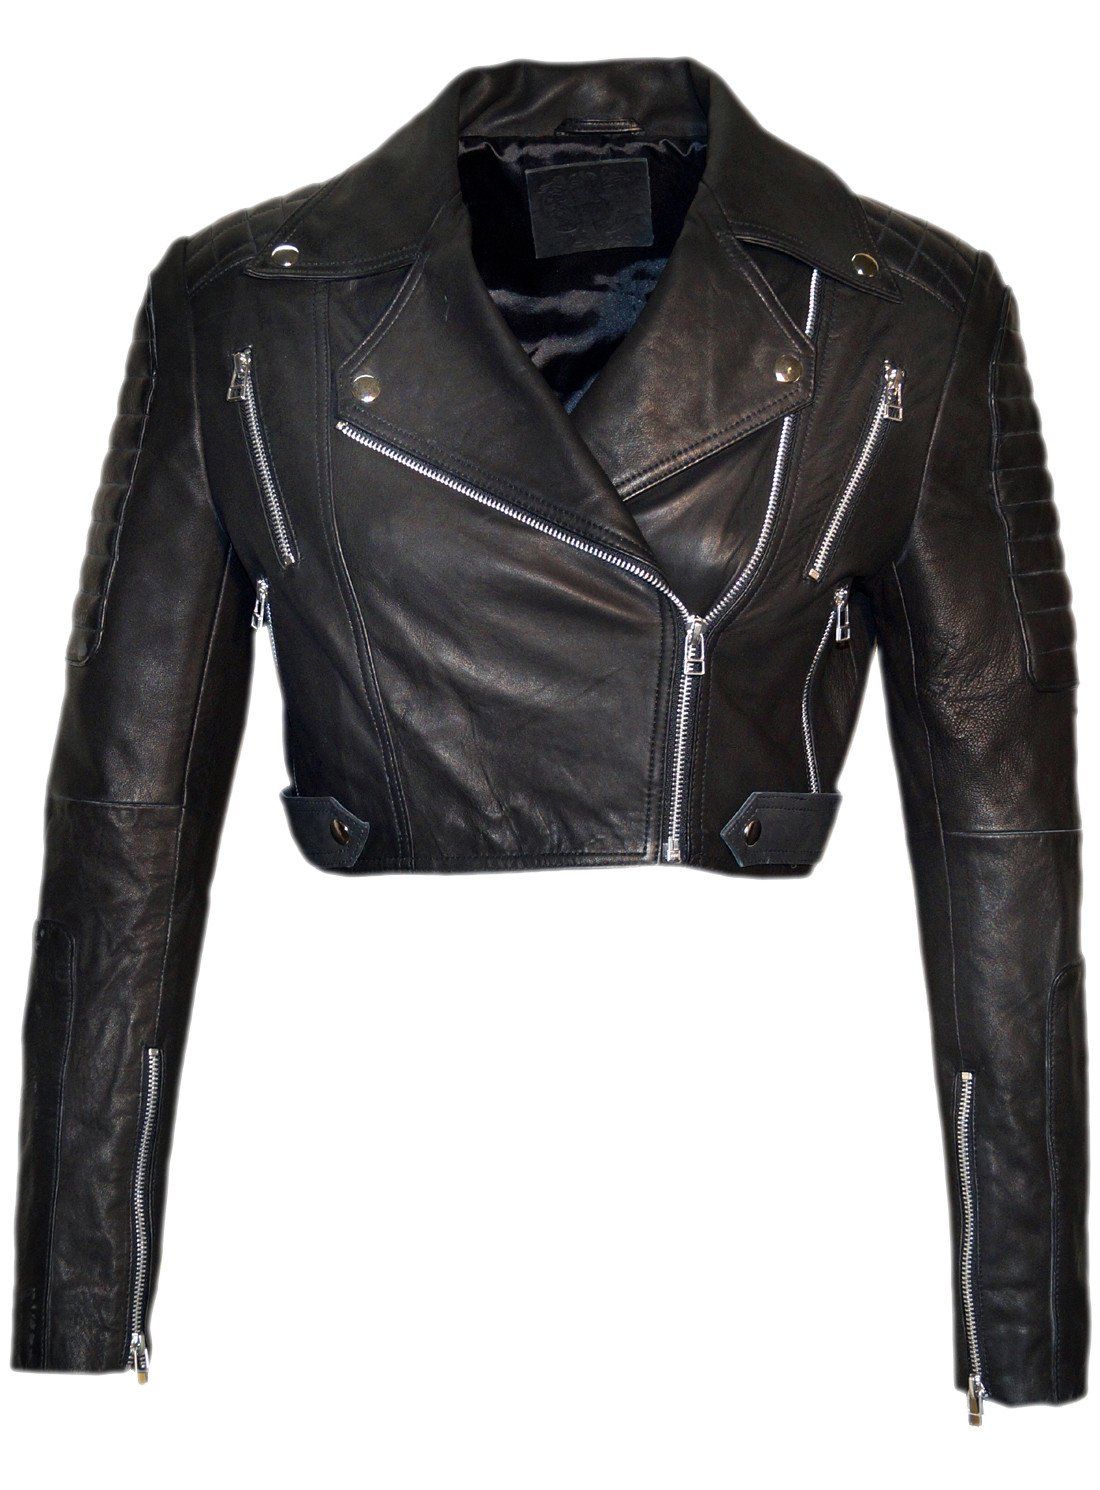 The Timeless Appeal of a Short Leather
Jacket